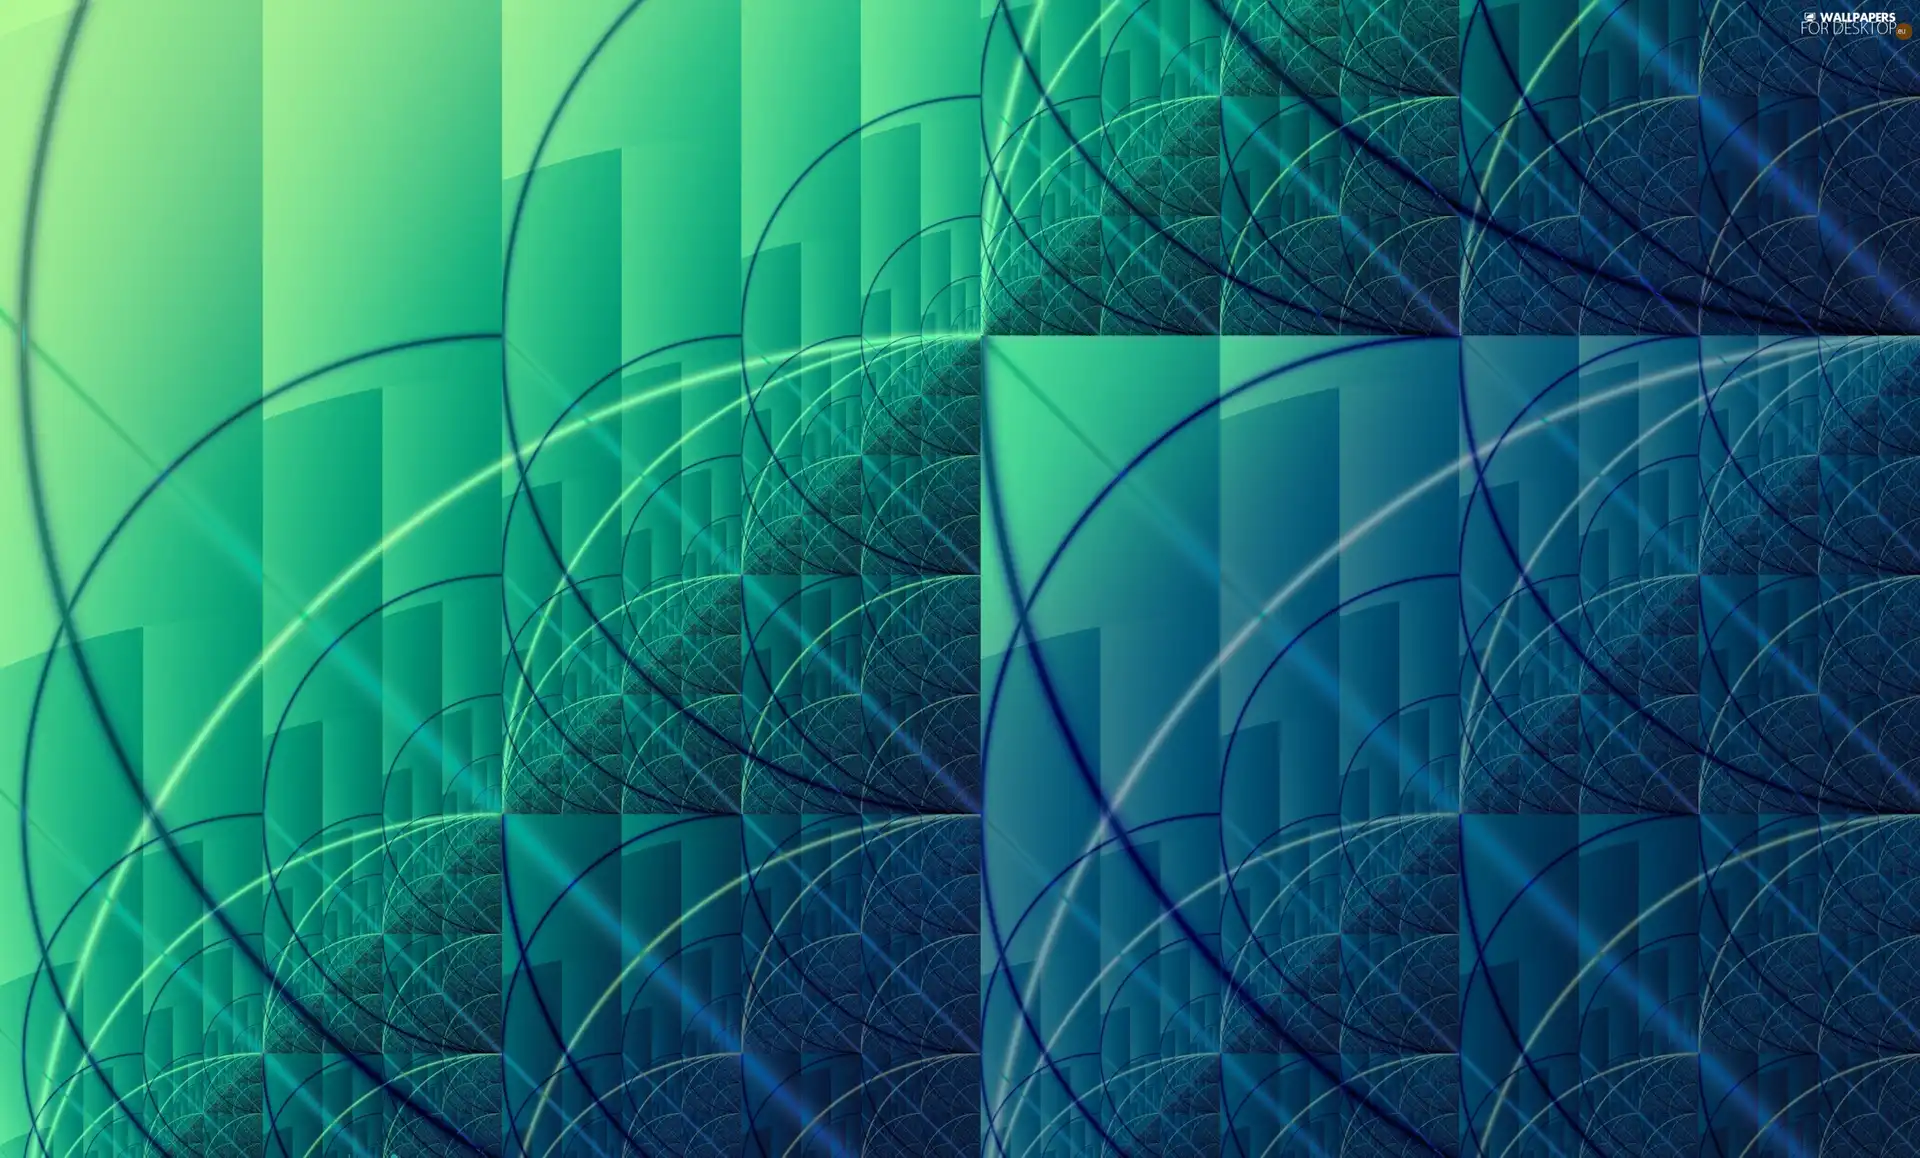 Fraktal, graphics, bows, Rectangles, green and Blue, abstraction